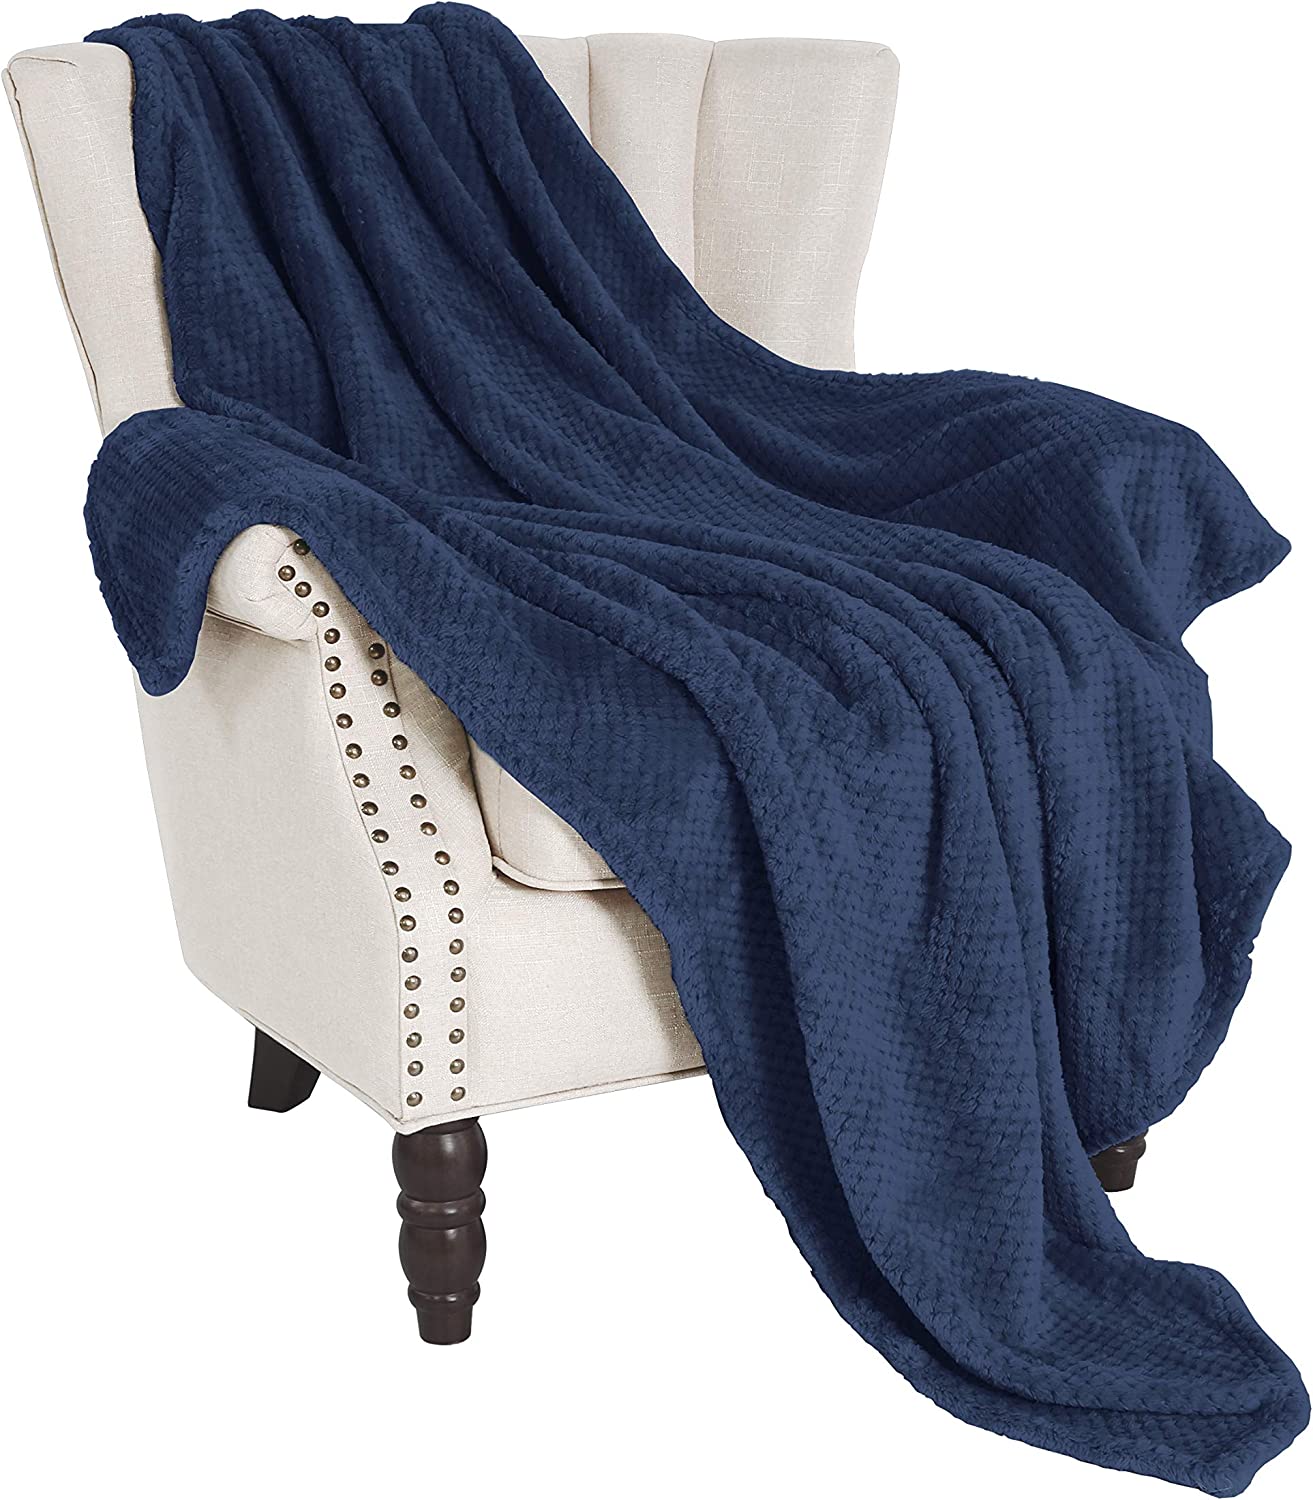 Ultra Soft Reversable Braided Textured Jacquard Oversized Throw Blanket - GREAT deal because one side is white, and the other side will be a random color (no pink / purple, all solid colors). - SHIPS FREE!